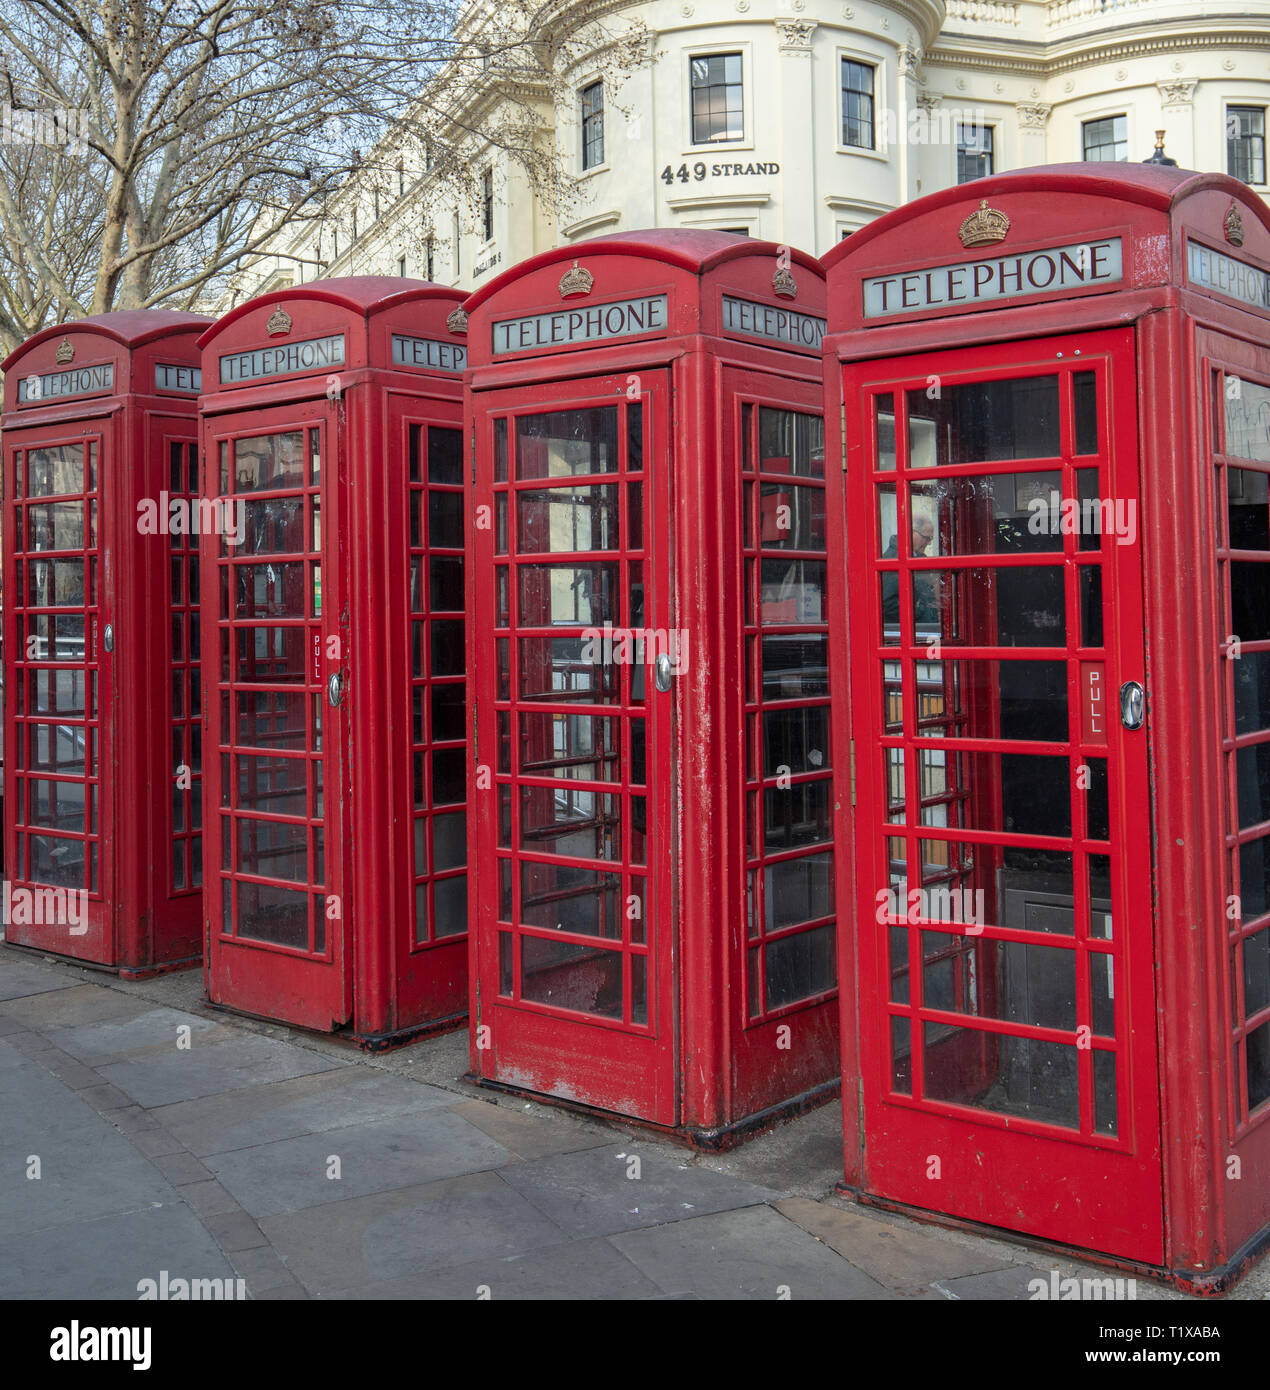 Four red traditional and heritage telephone boxes or kiosks stand in a row on the Strand, London, England, UK opposite Charing Cross Station. Stock Photo